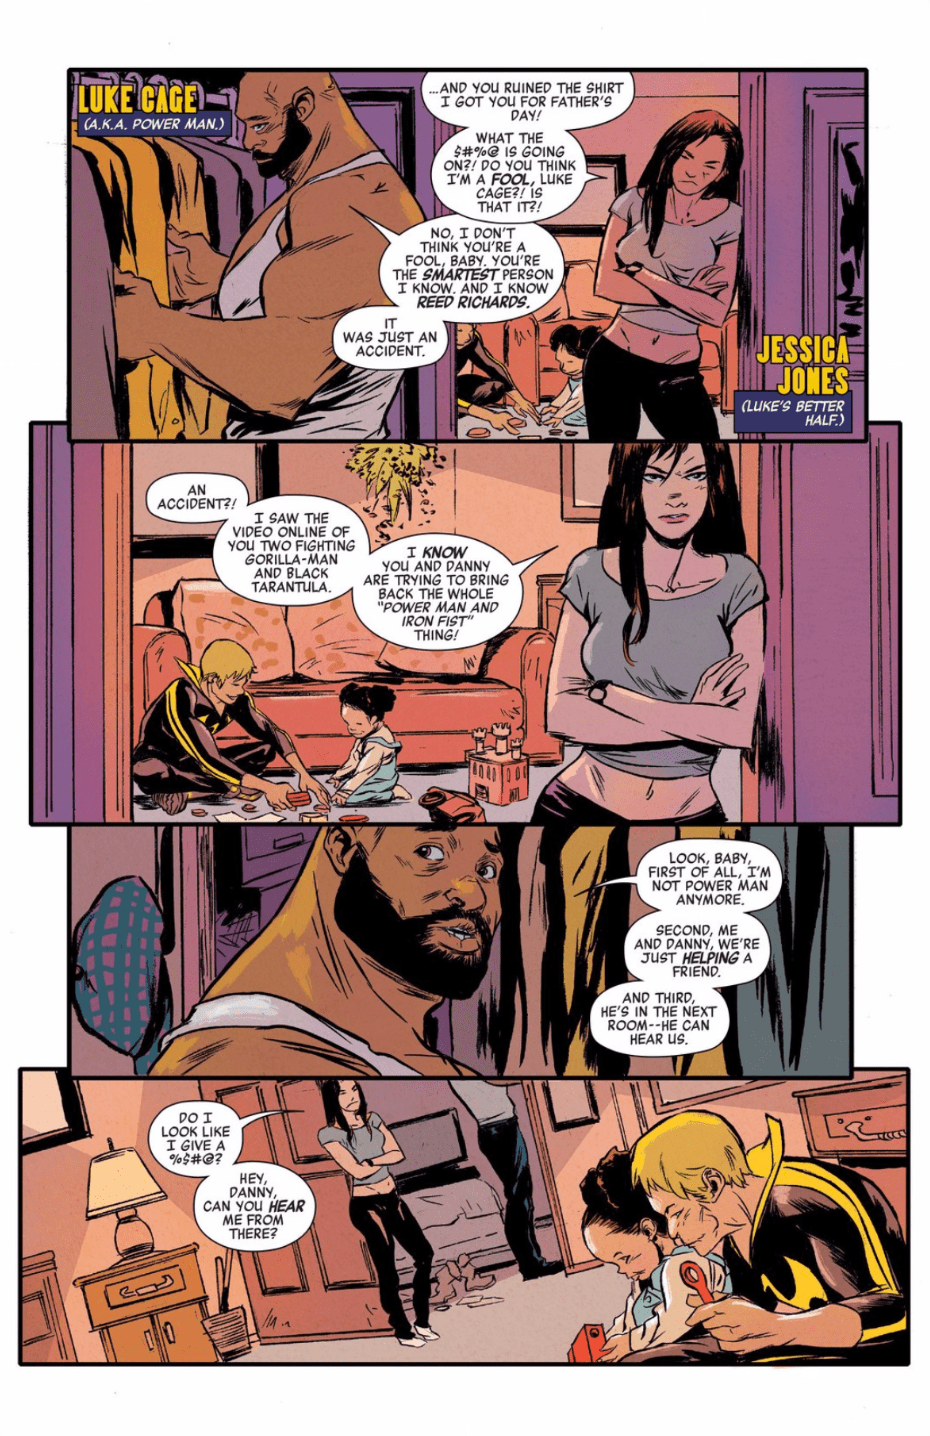 The New Power Man And Iron Fist Comic Is Using Jessica Jones All Wrong